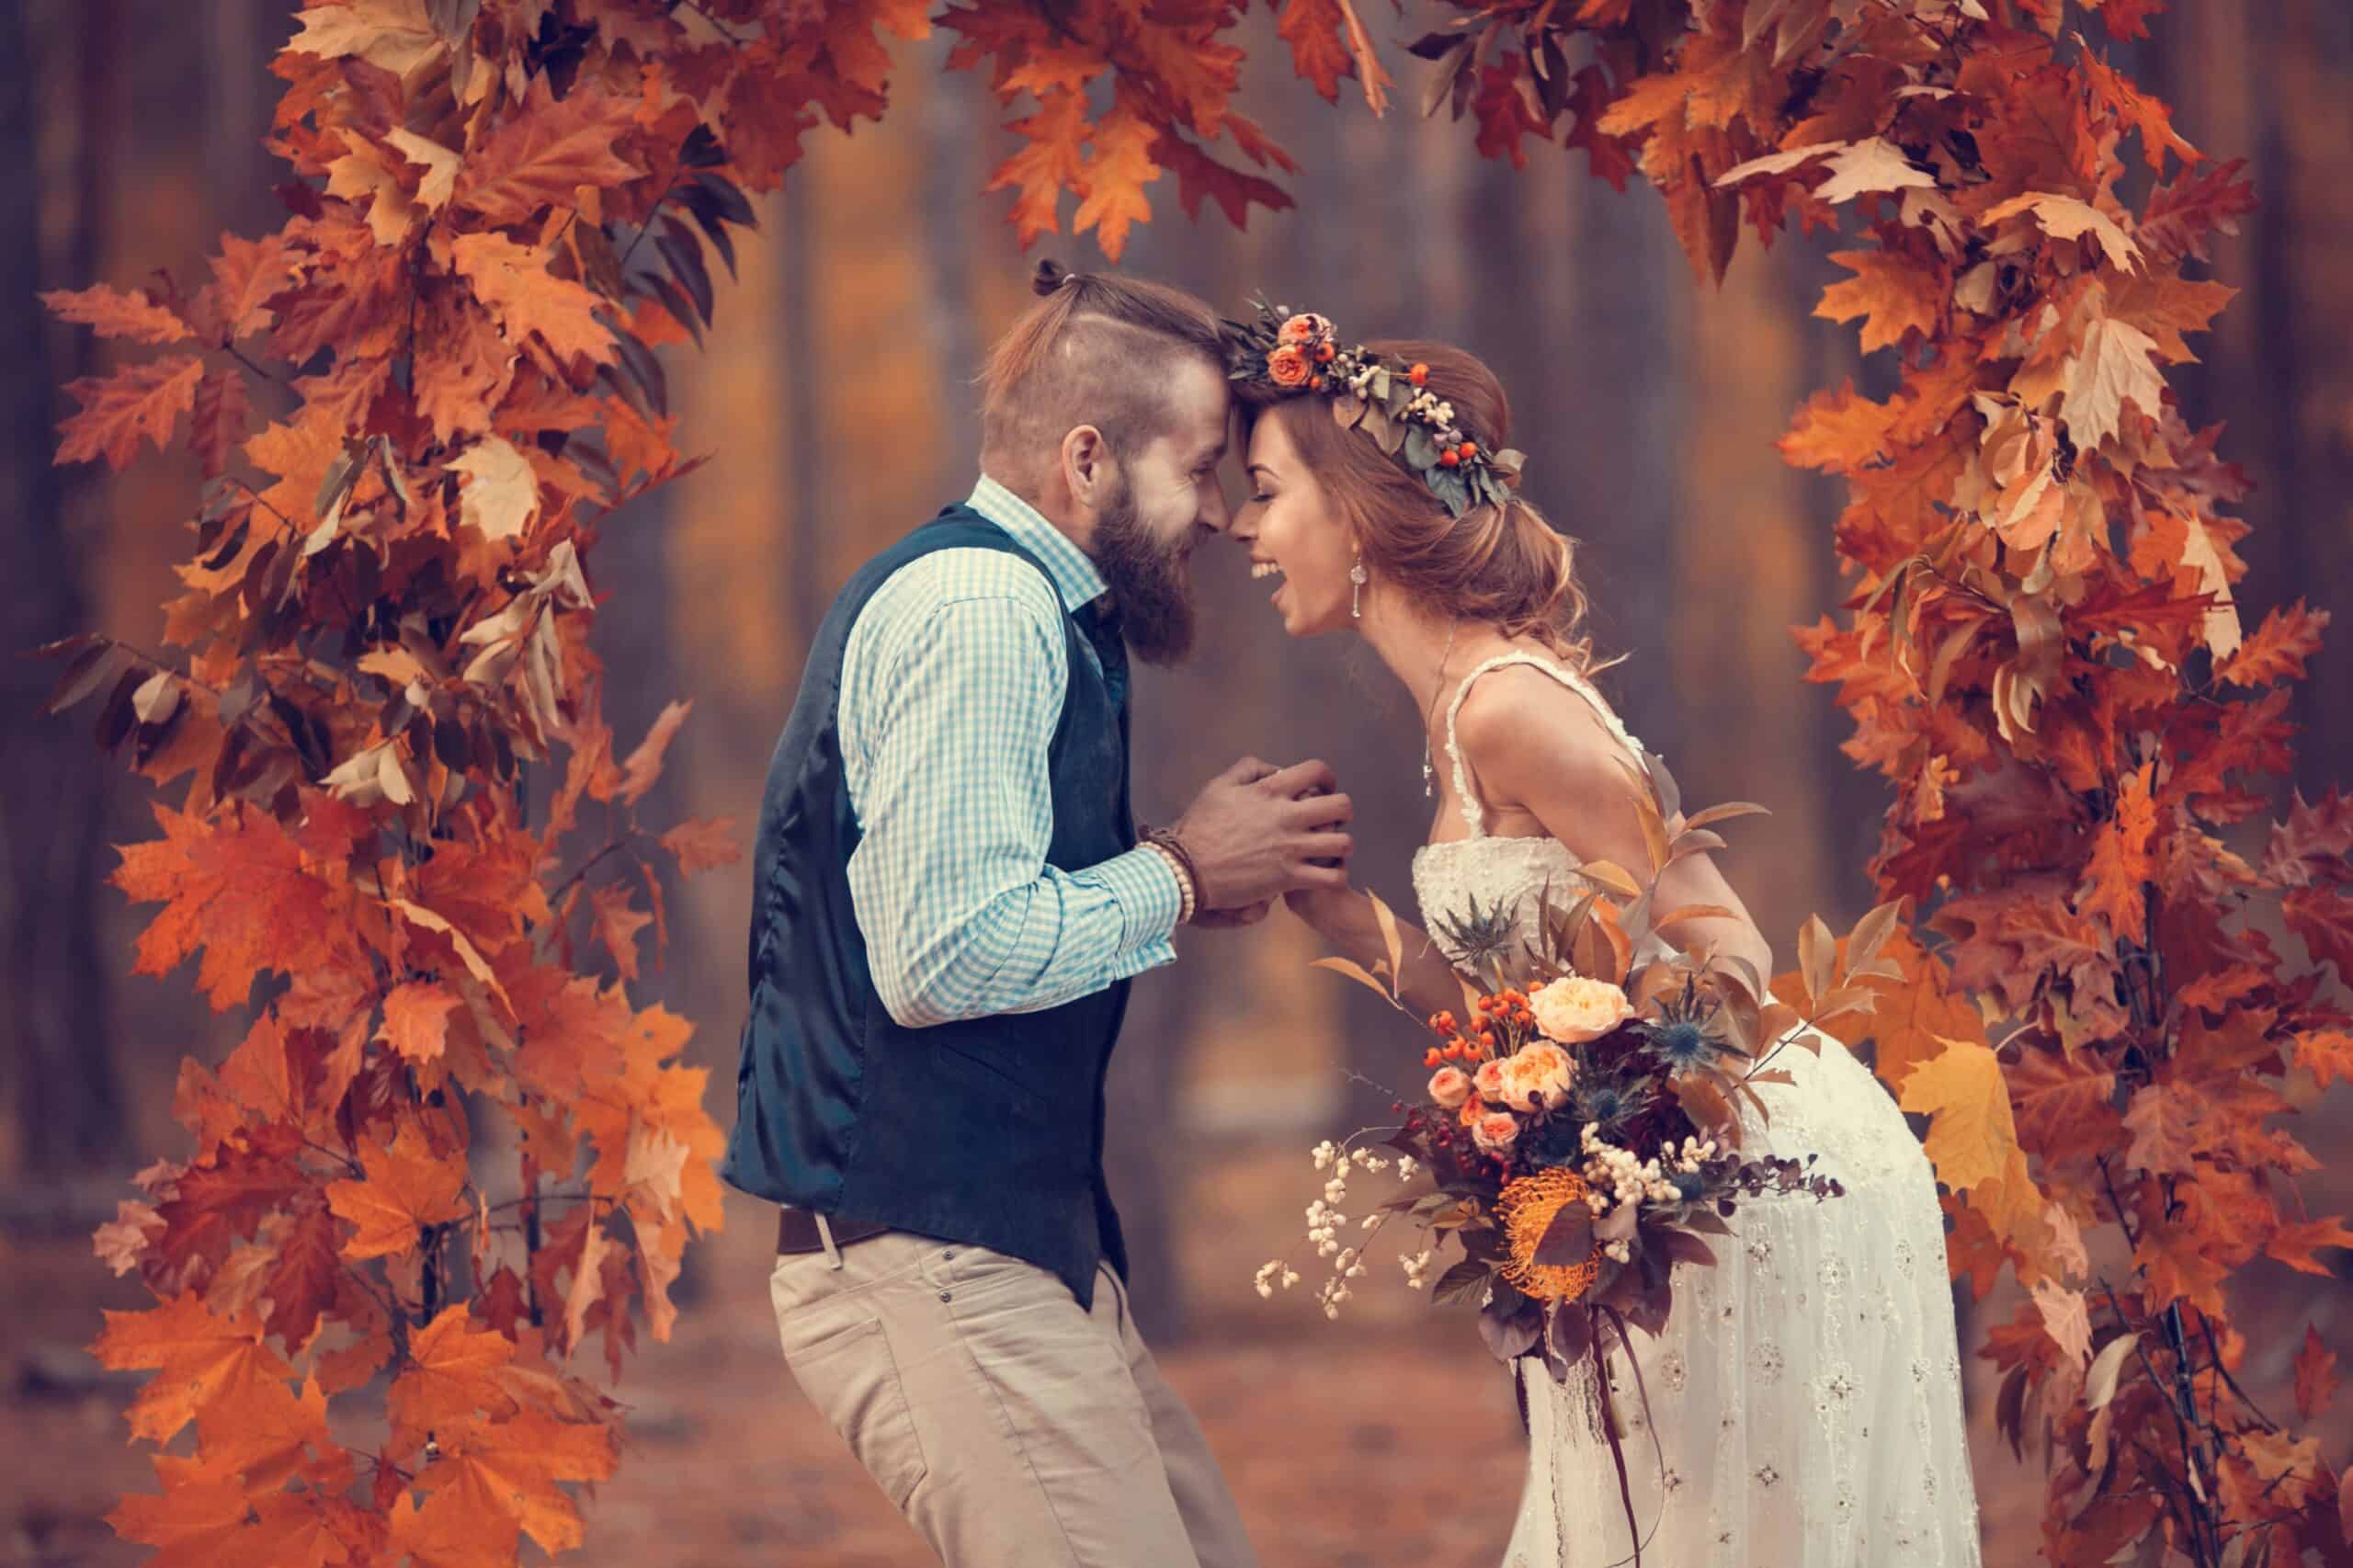 Celebrate the changing season at your autumn wedding